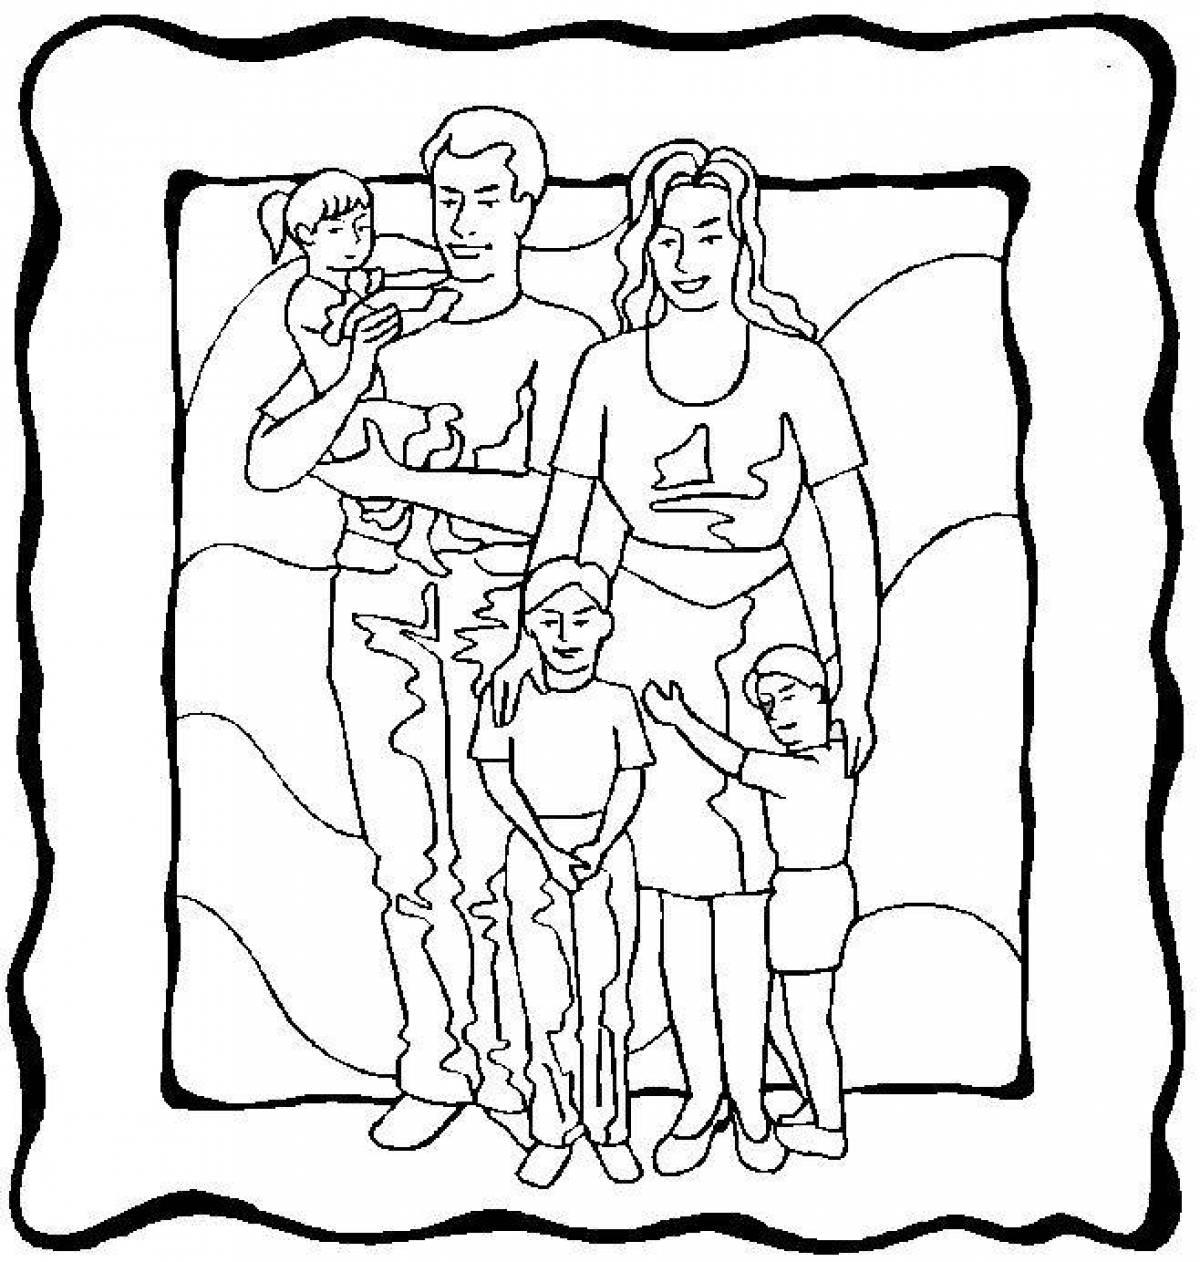 Bright mom and dad coloring book